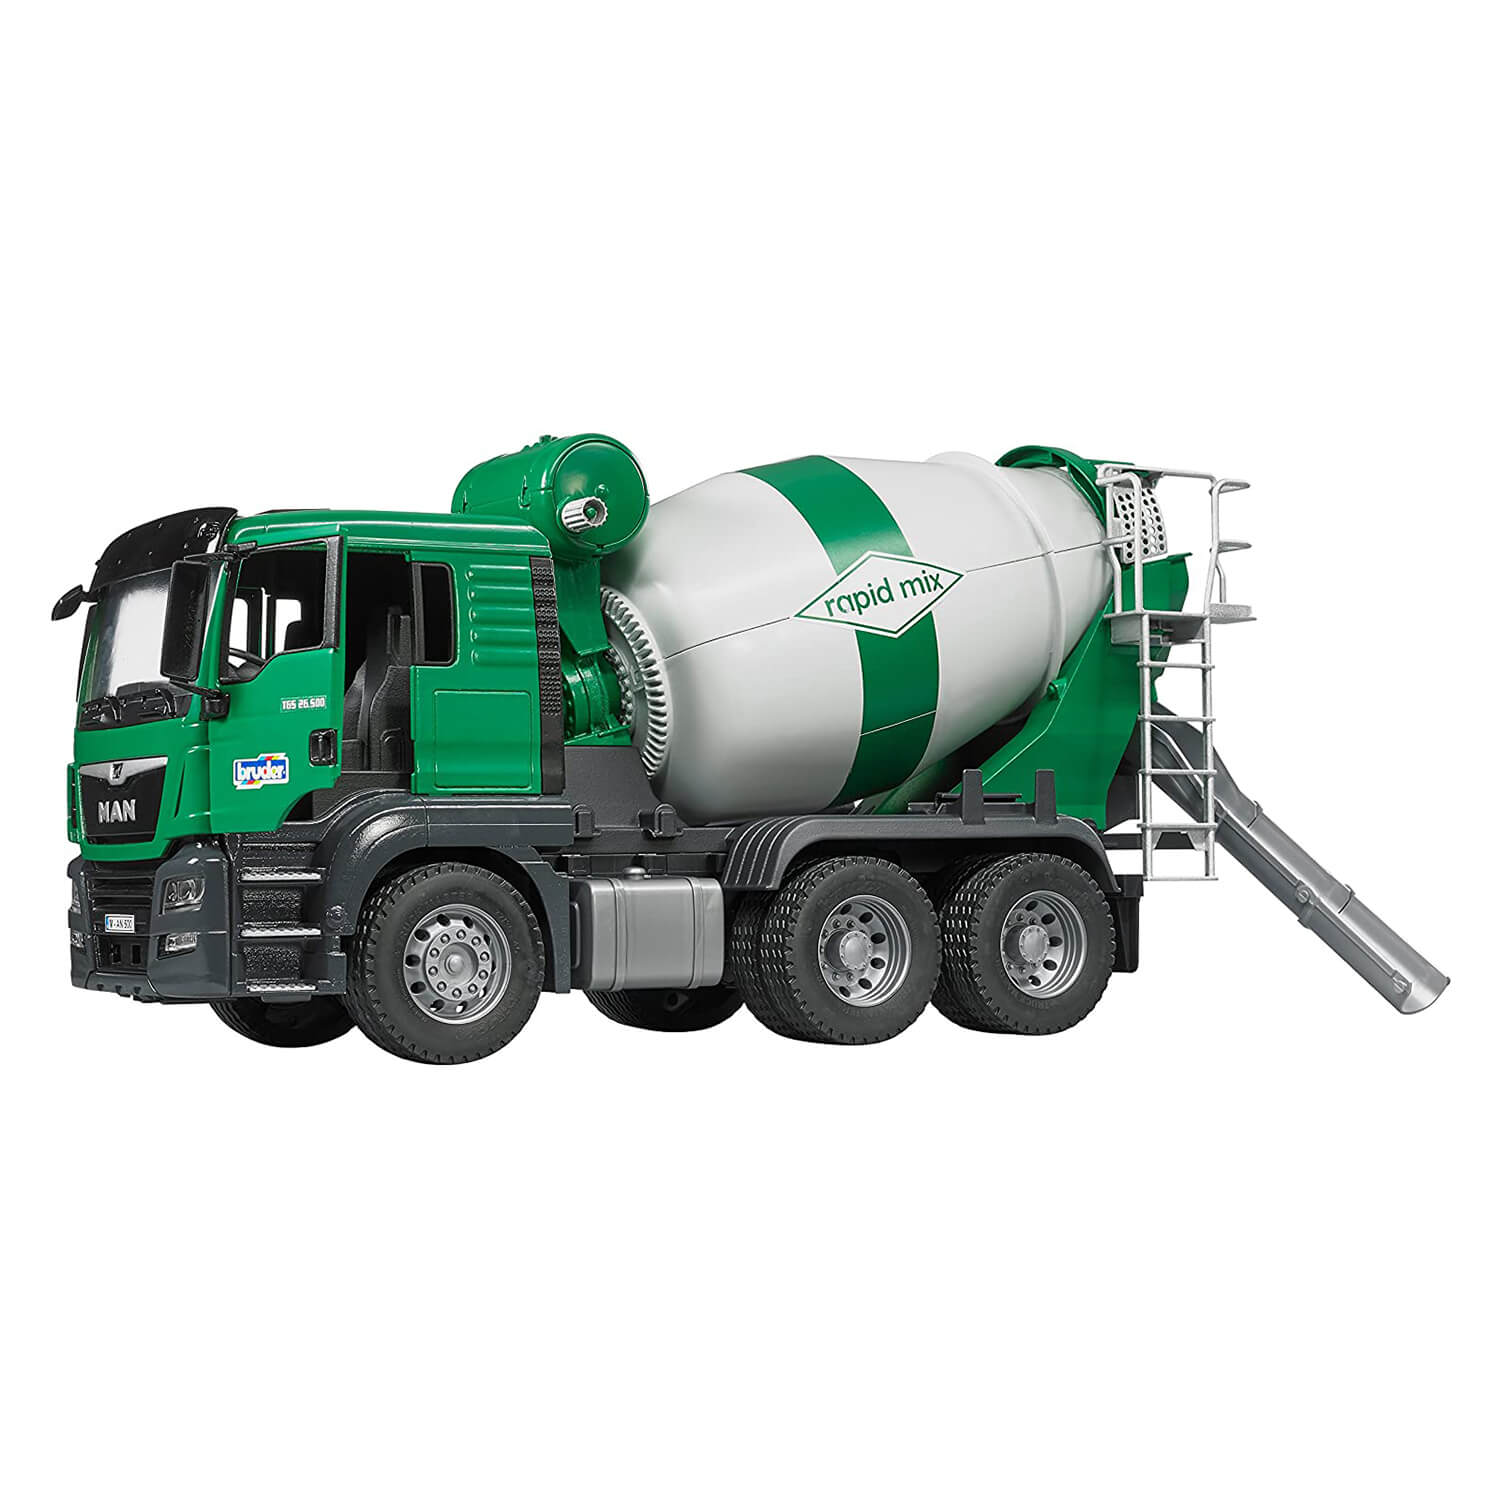 Side view of the cement mixer truck.